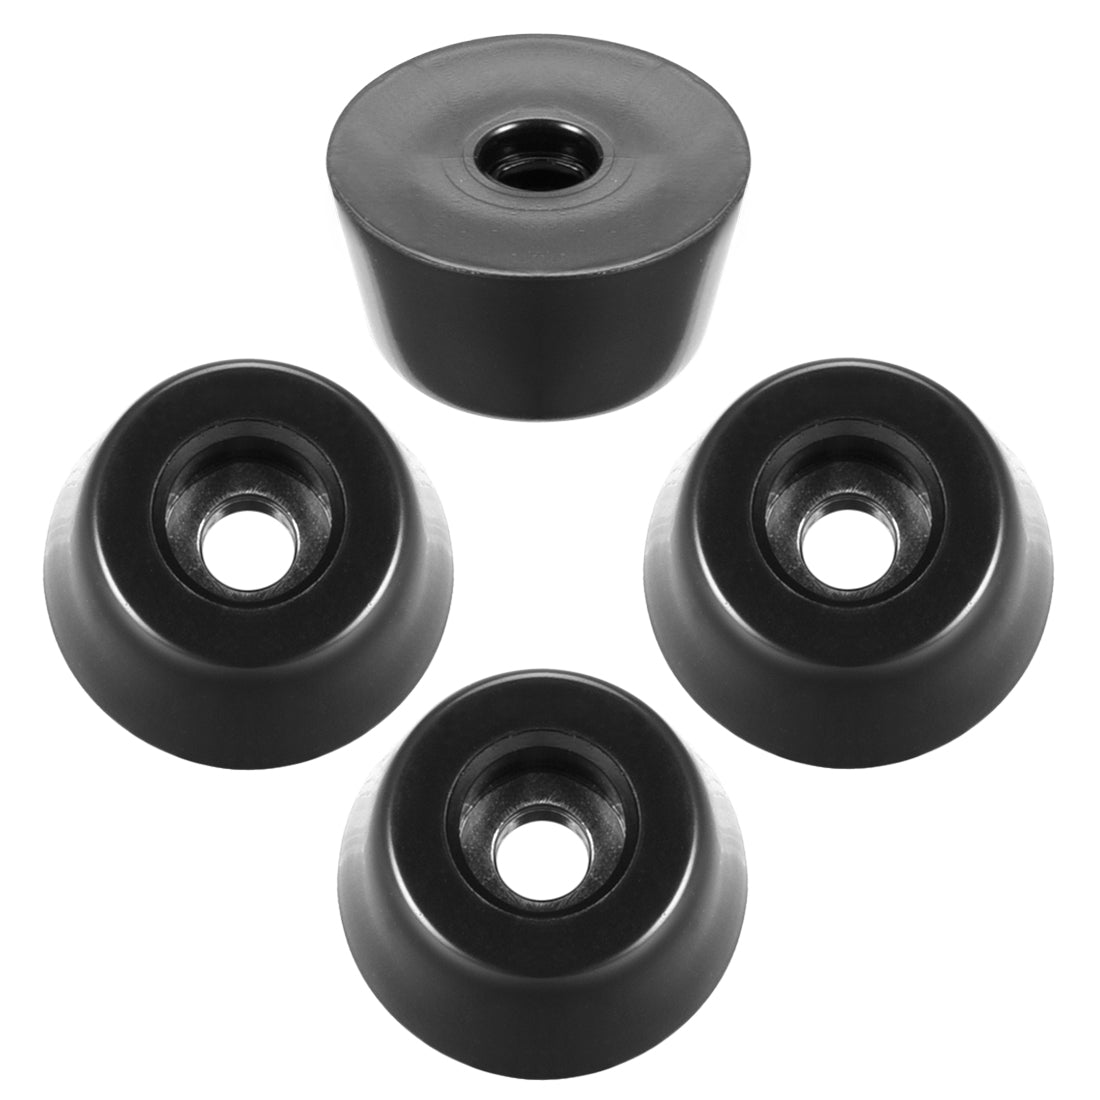 uxcell Uxcell Rubber Feet Bumpers Pads D18x15xH11mm Black 4pcs